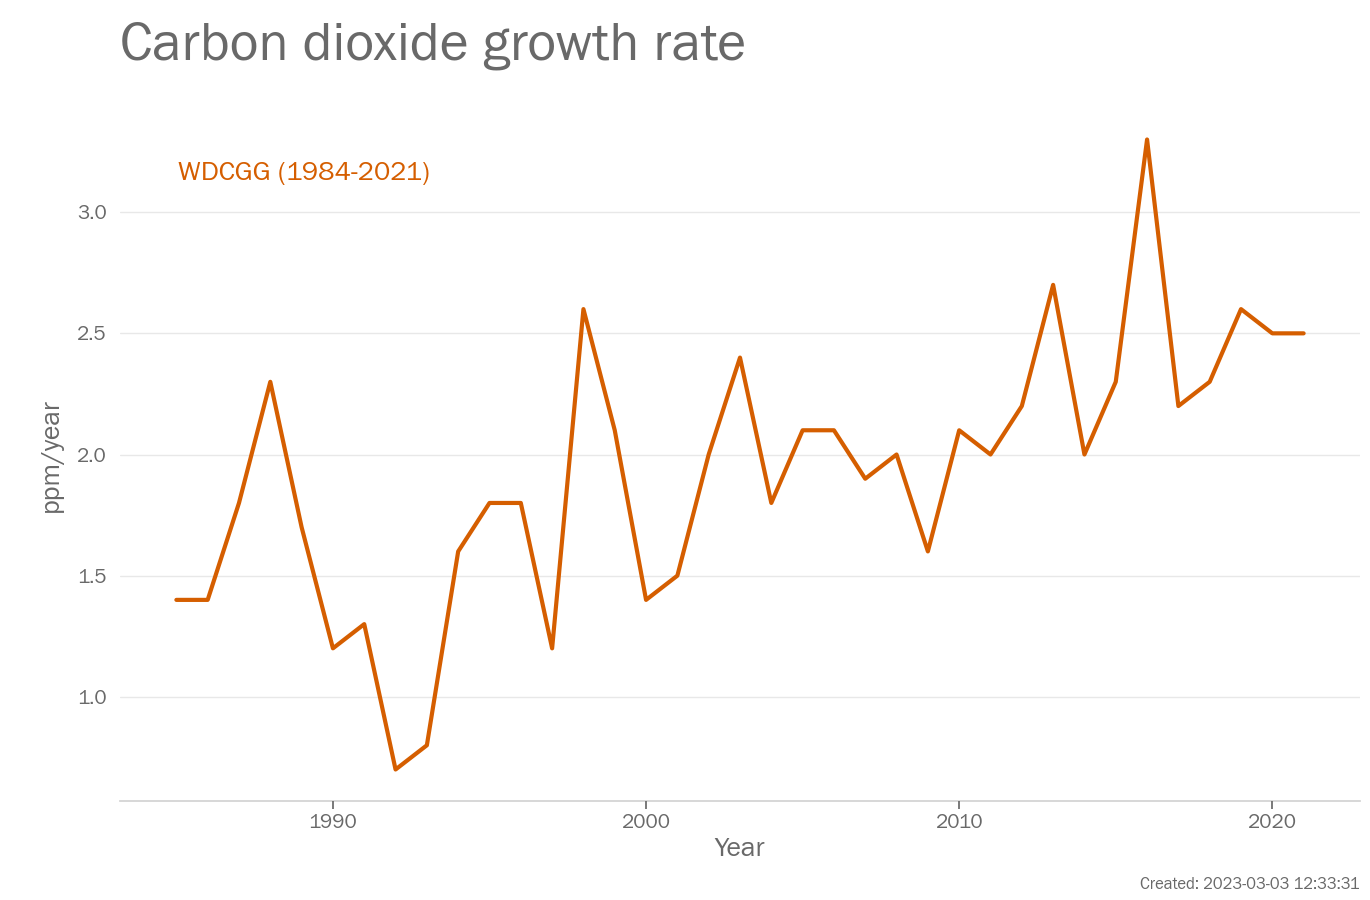 Annual Growth rate of of carbon dioxide concentration (ppm/year)  from 1984-2021. Data are from WDCGG.